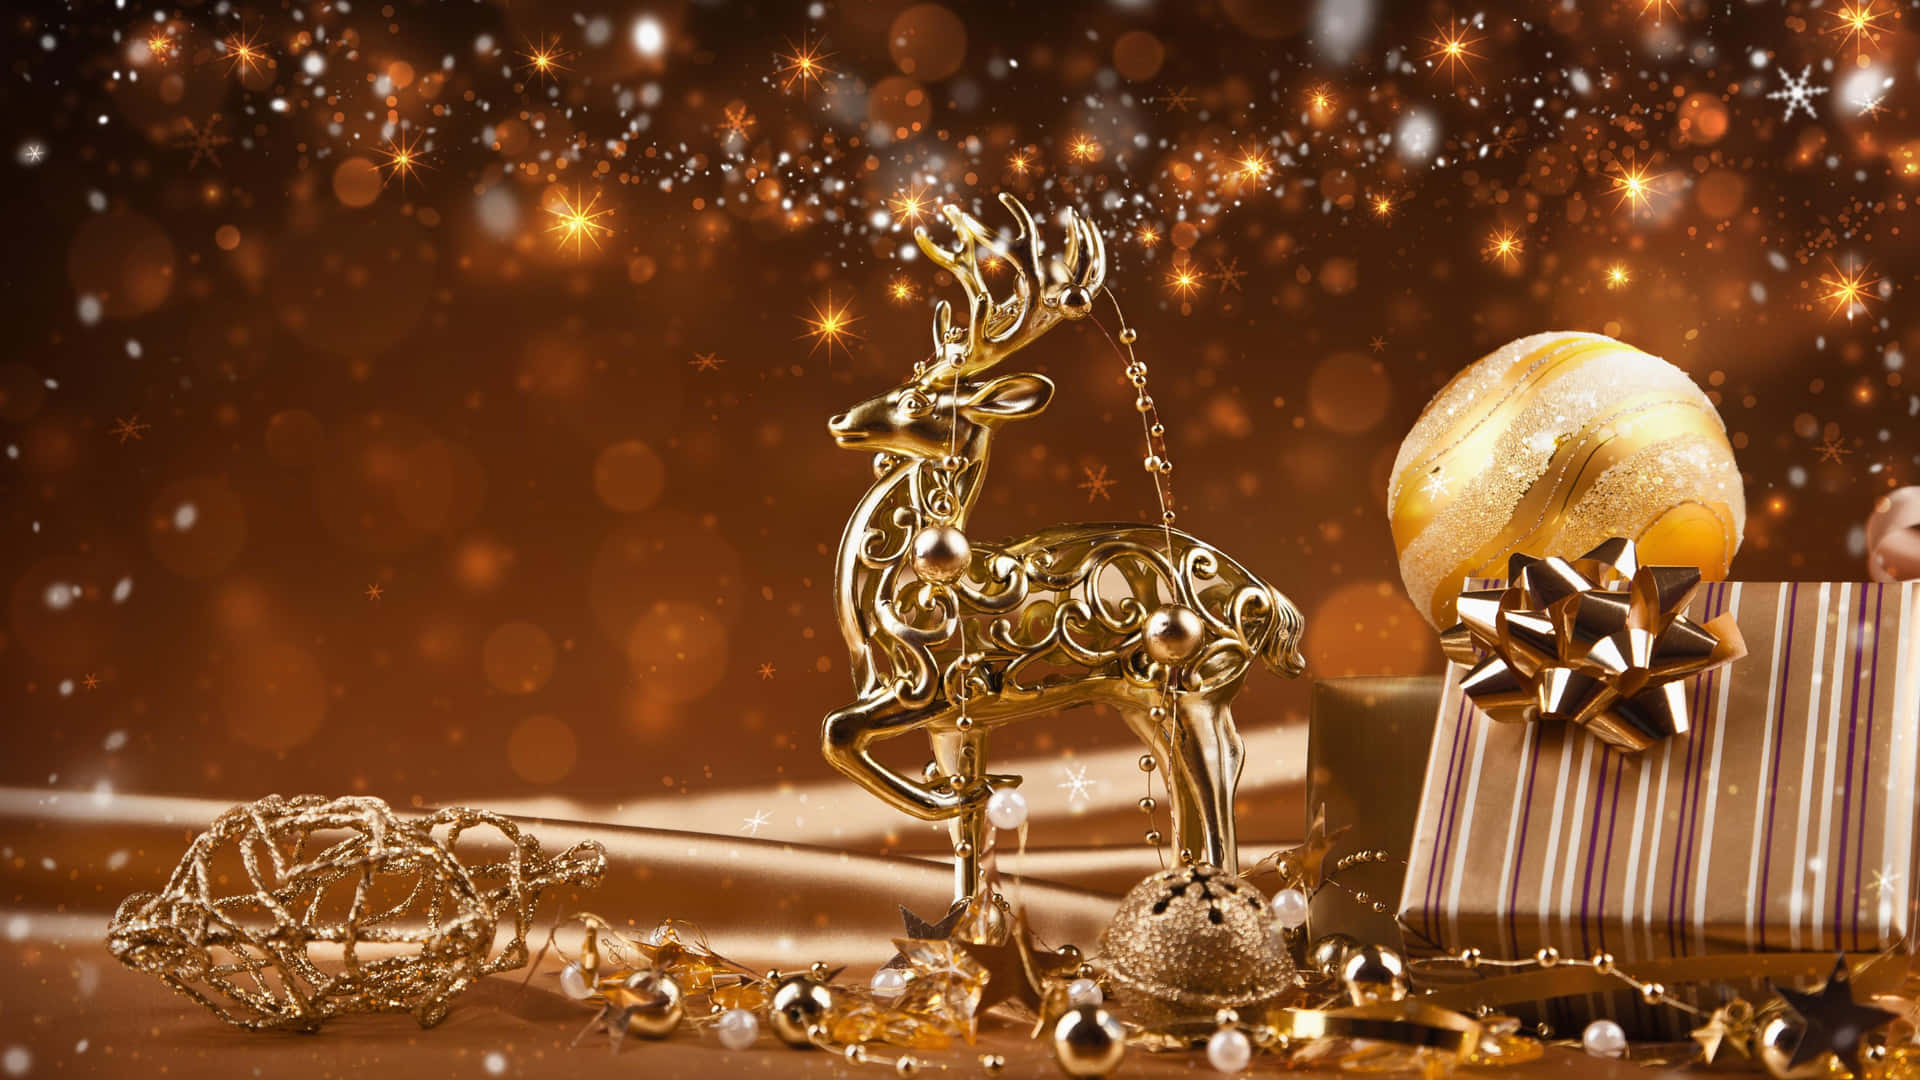 Gold Christmas Decorations Wallpaper